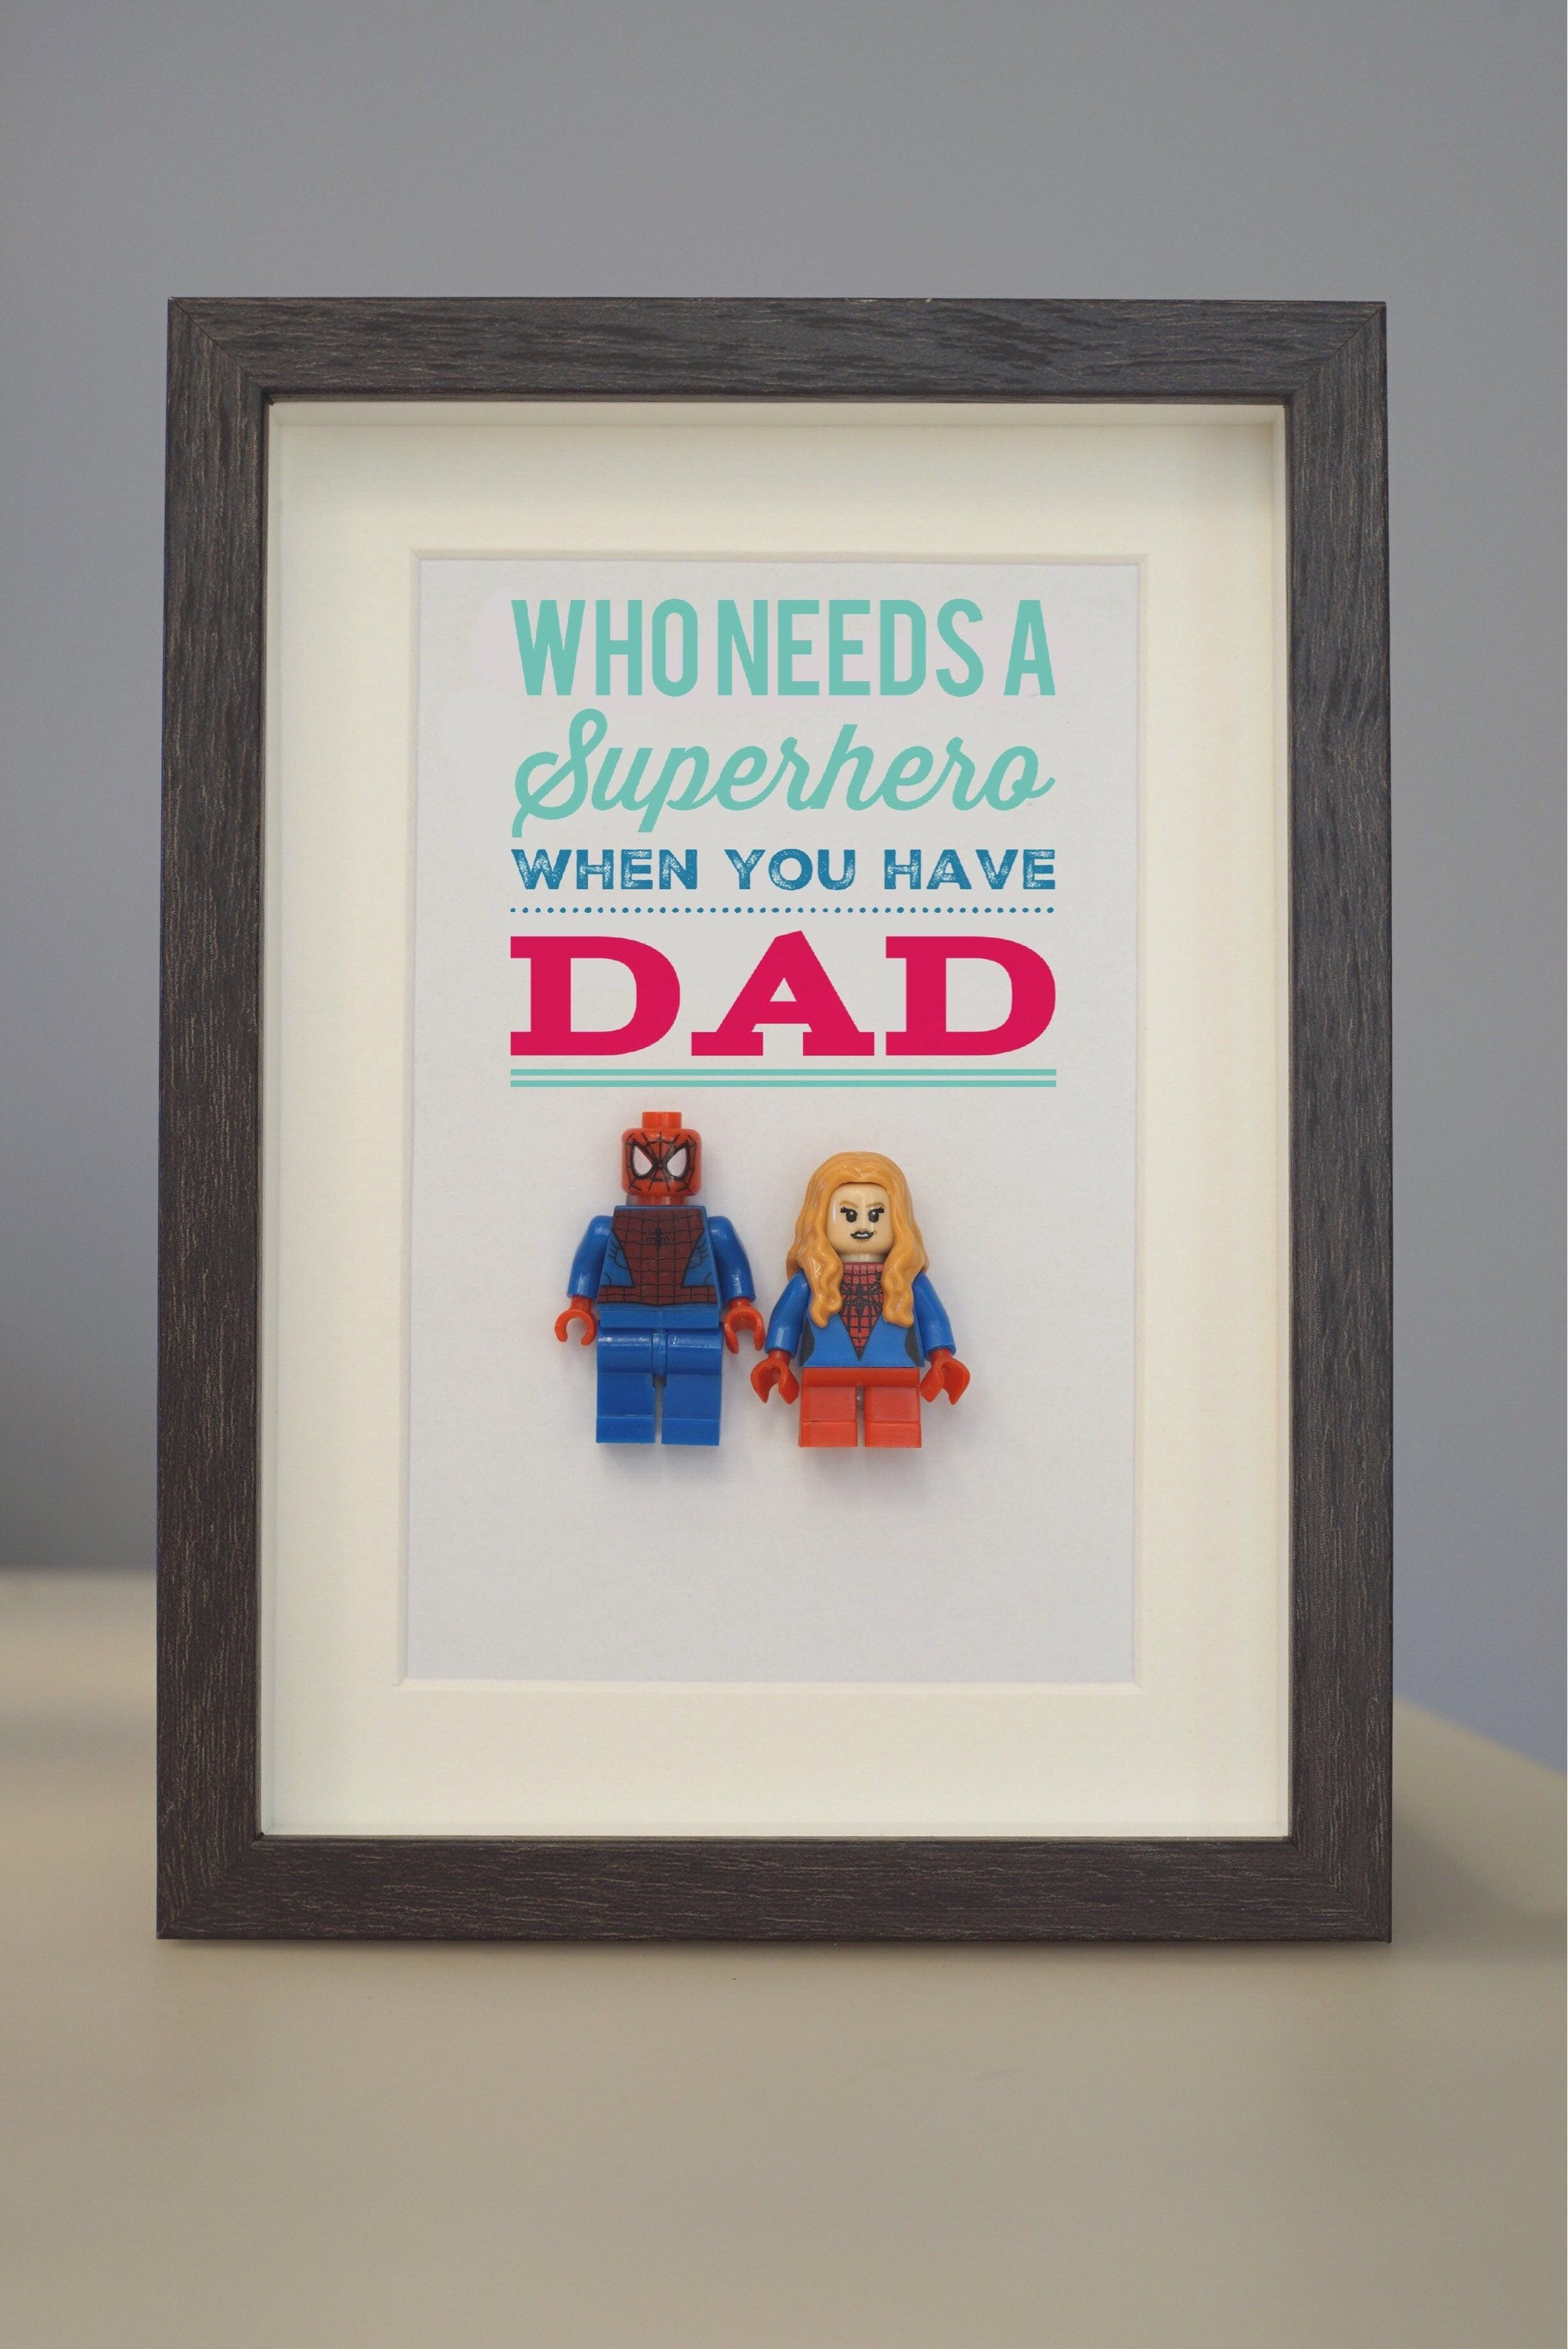 Fathers Day Gift, Valentines Gift, Personalized Gift, Anniversary Gifts for Husband, Dad Birthday gift, Gifts for dad, Daughter to dad gift